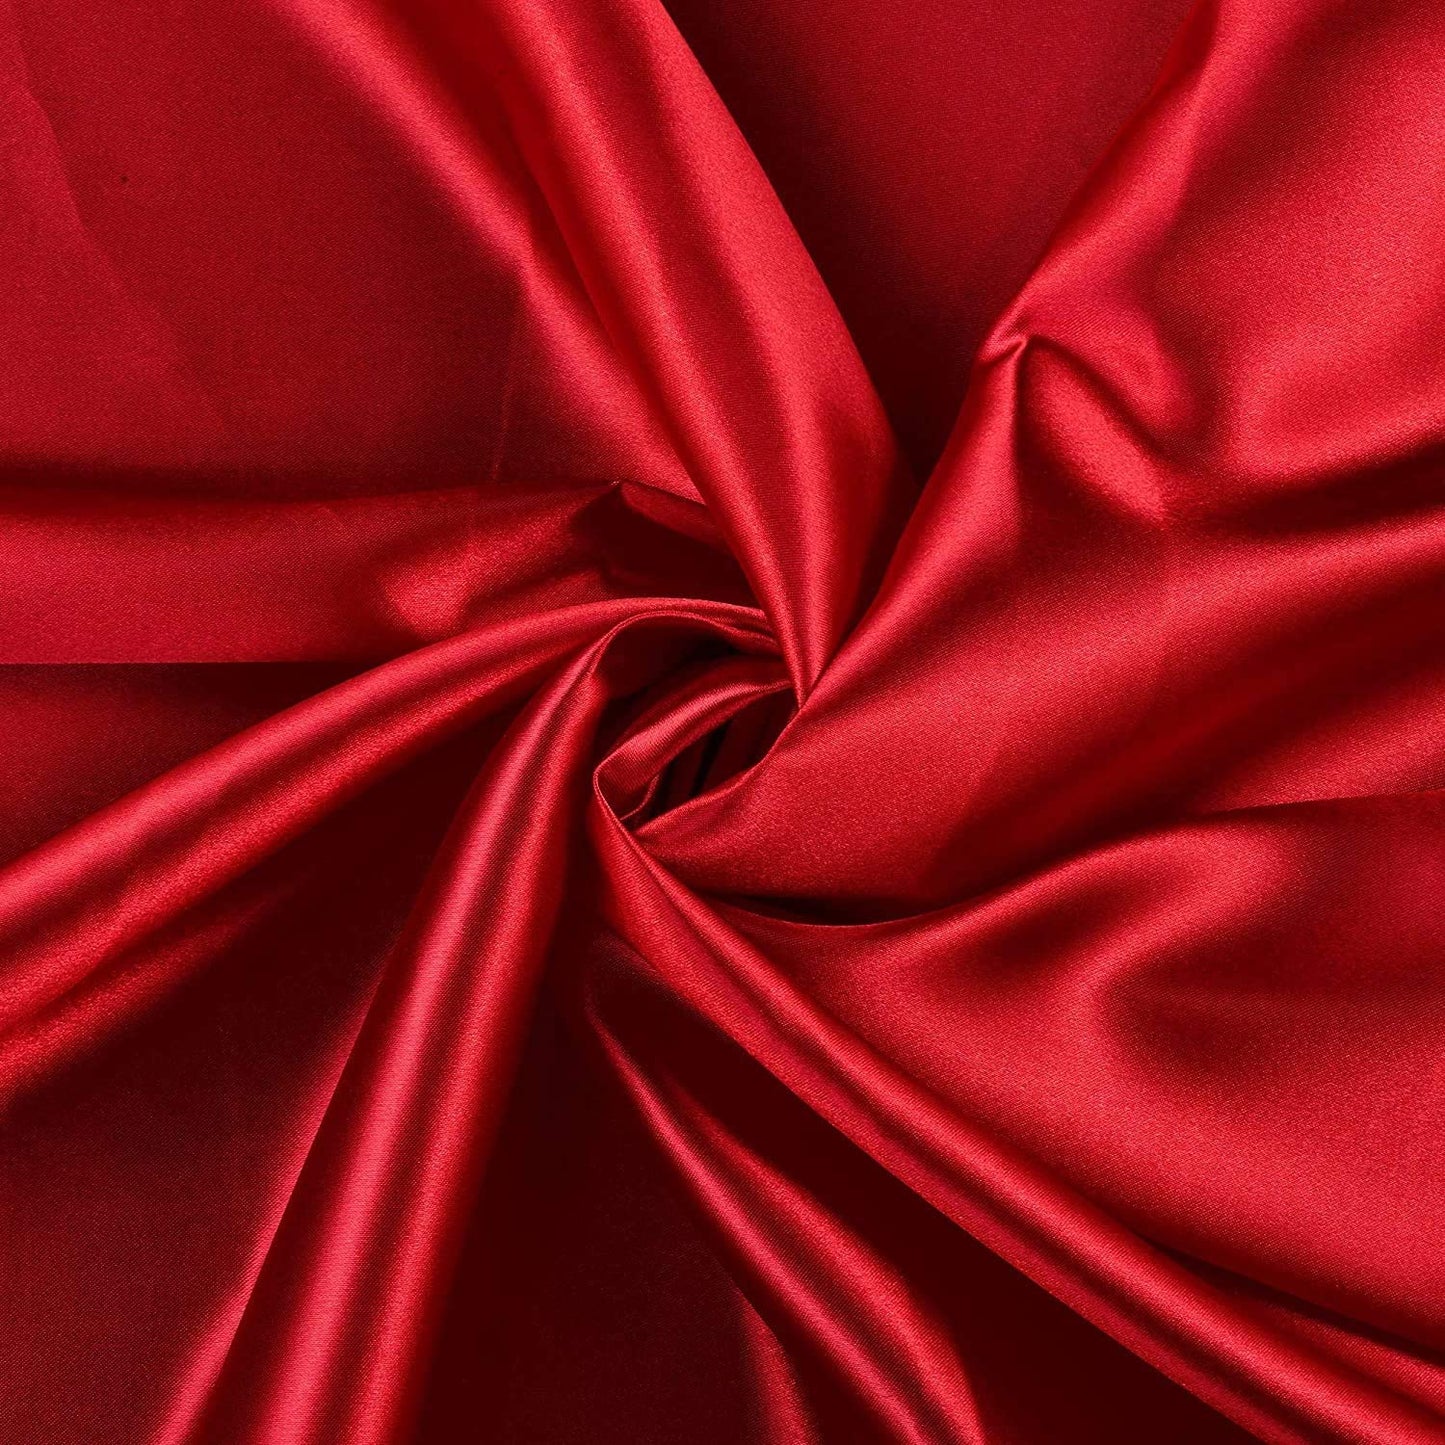 100% Polyester Soft Bridal Charmeuse Satin Fabric (Apple Red # 53,